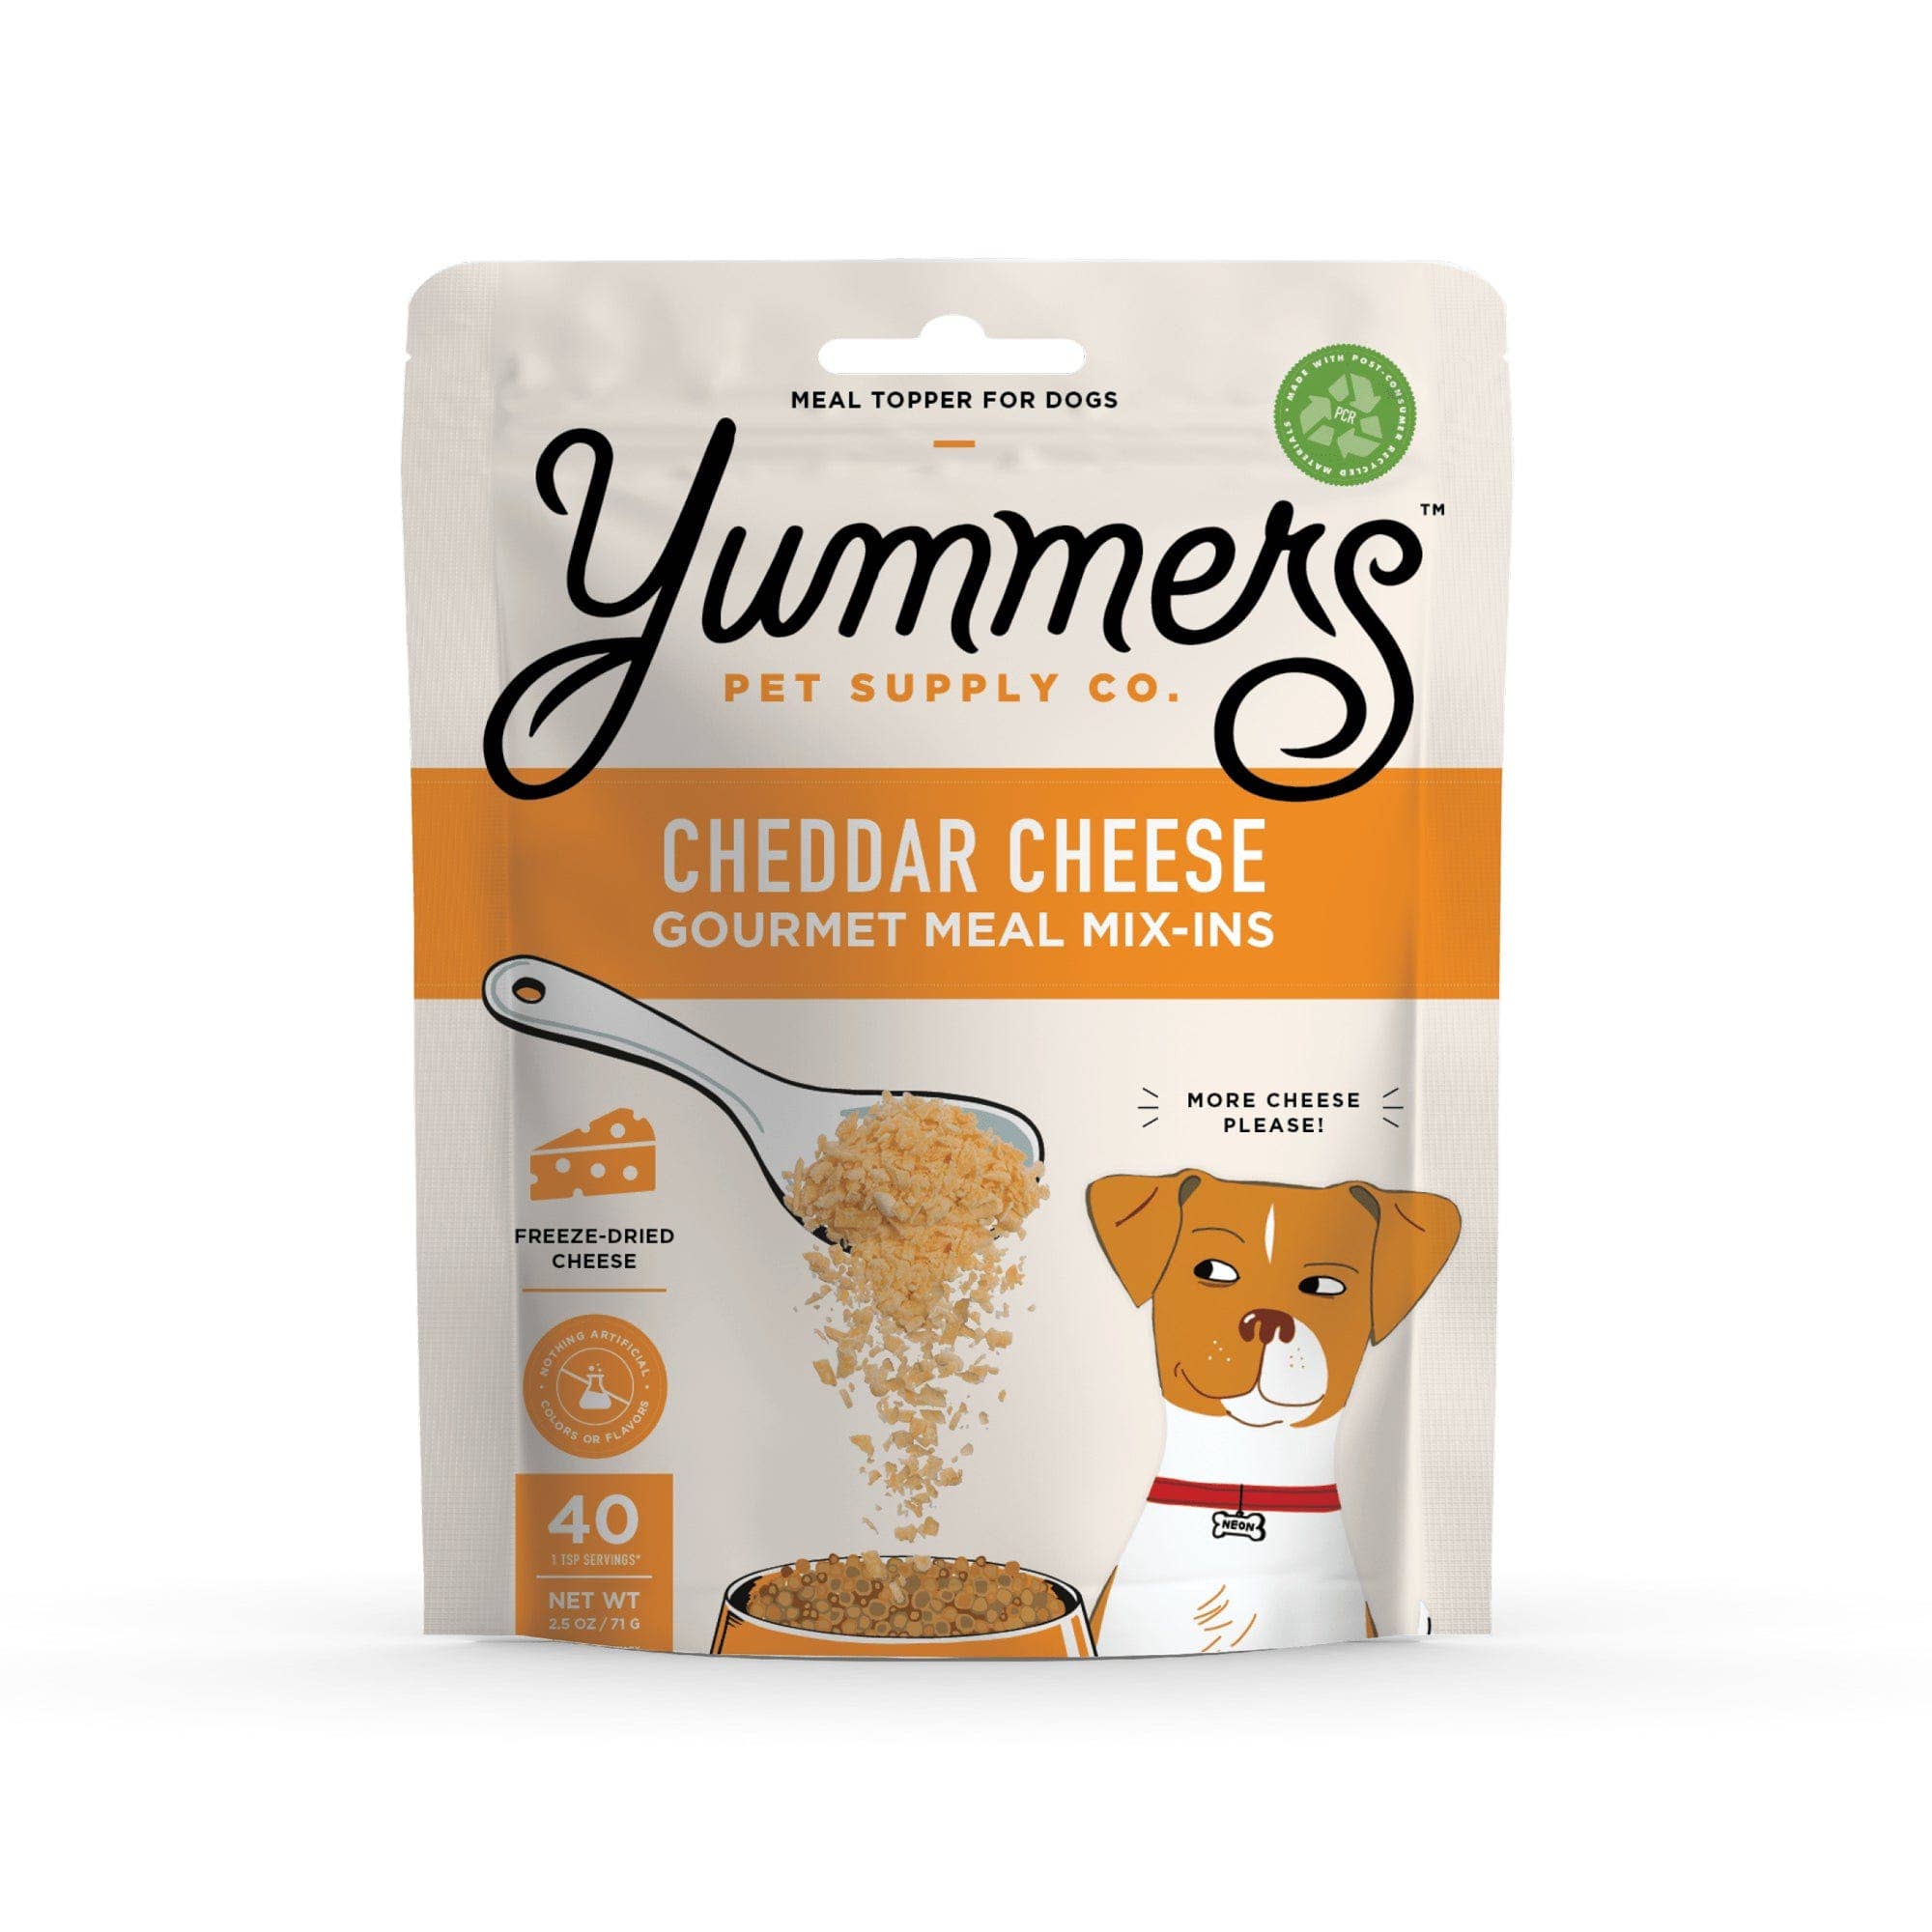 Yummers - Freeze-dried Cheddar Cheese Gourmet Meal Mix-in for Dogs, 2.5 oz.